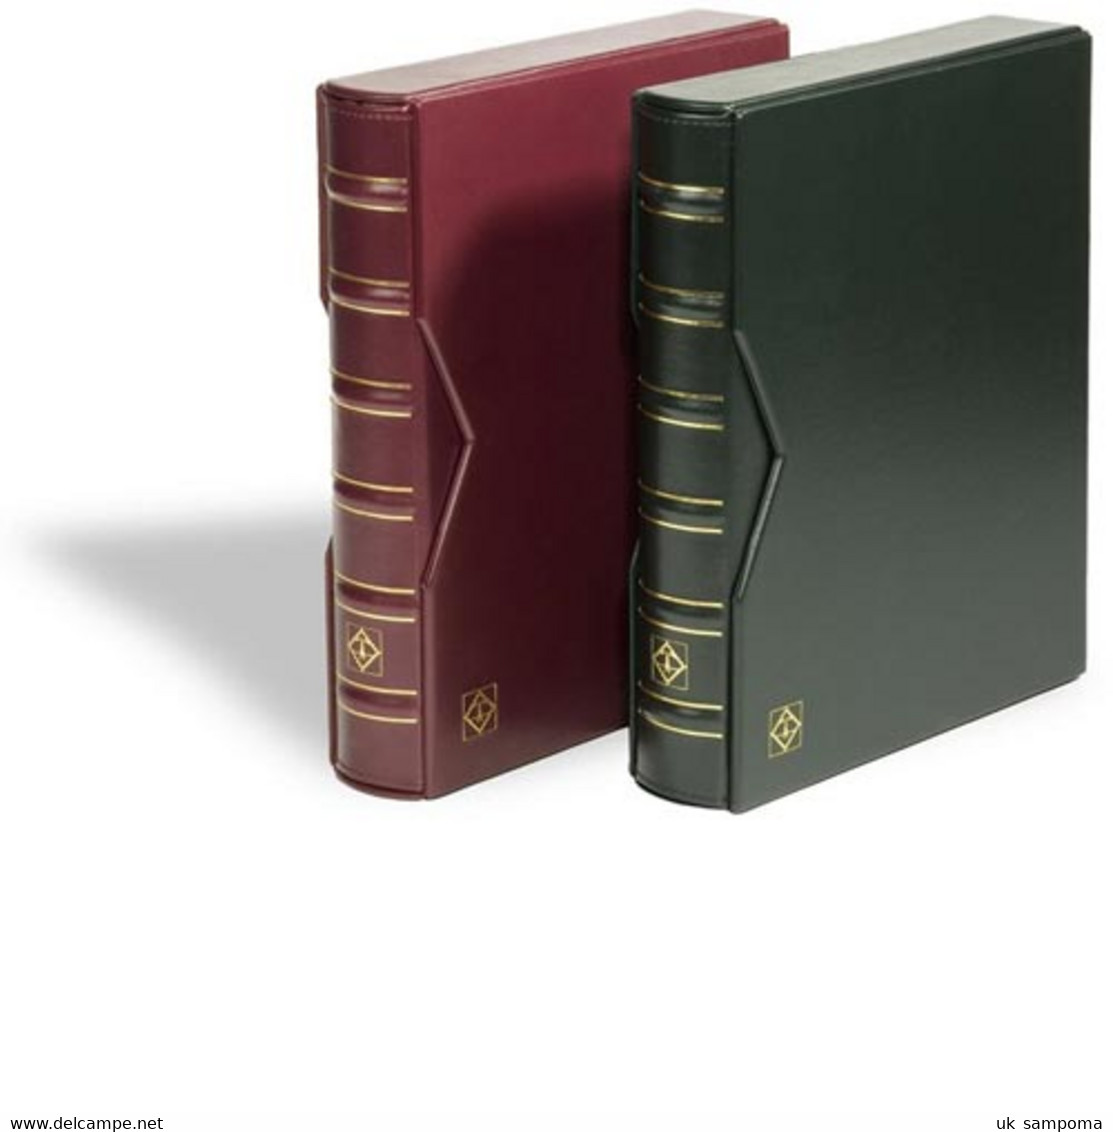 Ringbinder VARIO, In Classic Design Incl. Slipcase, Blue - Large Format, Black Pages